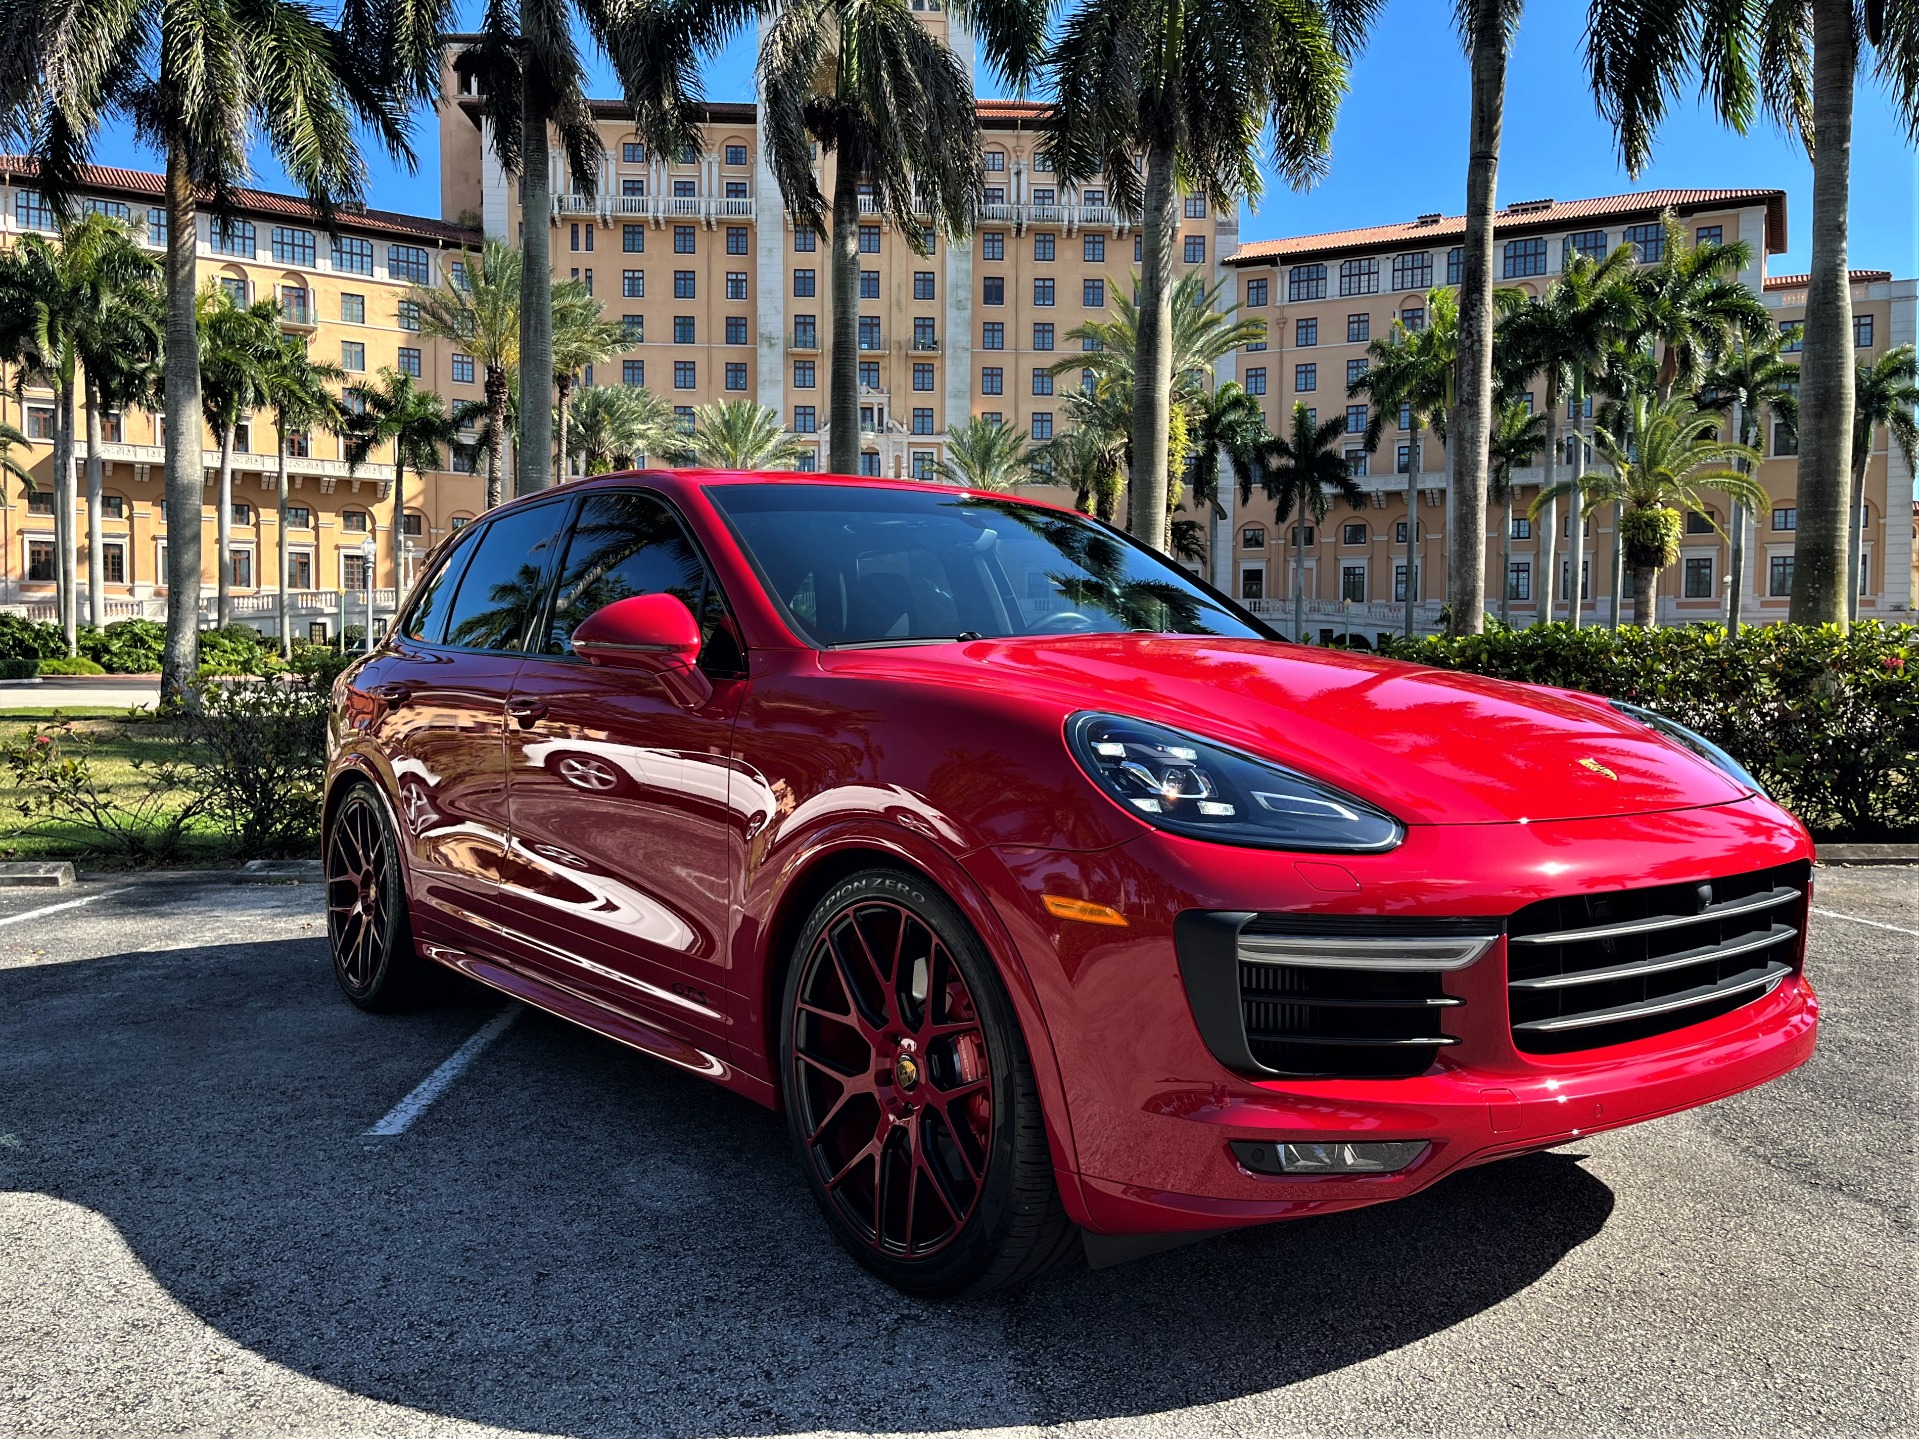 Used 2017 Porsche Cayenne GTS for sale $88,850 at The Gables Sports Cars in Miami FL 33146 2